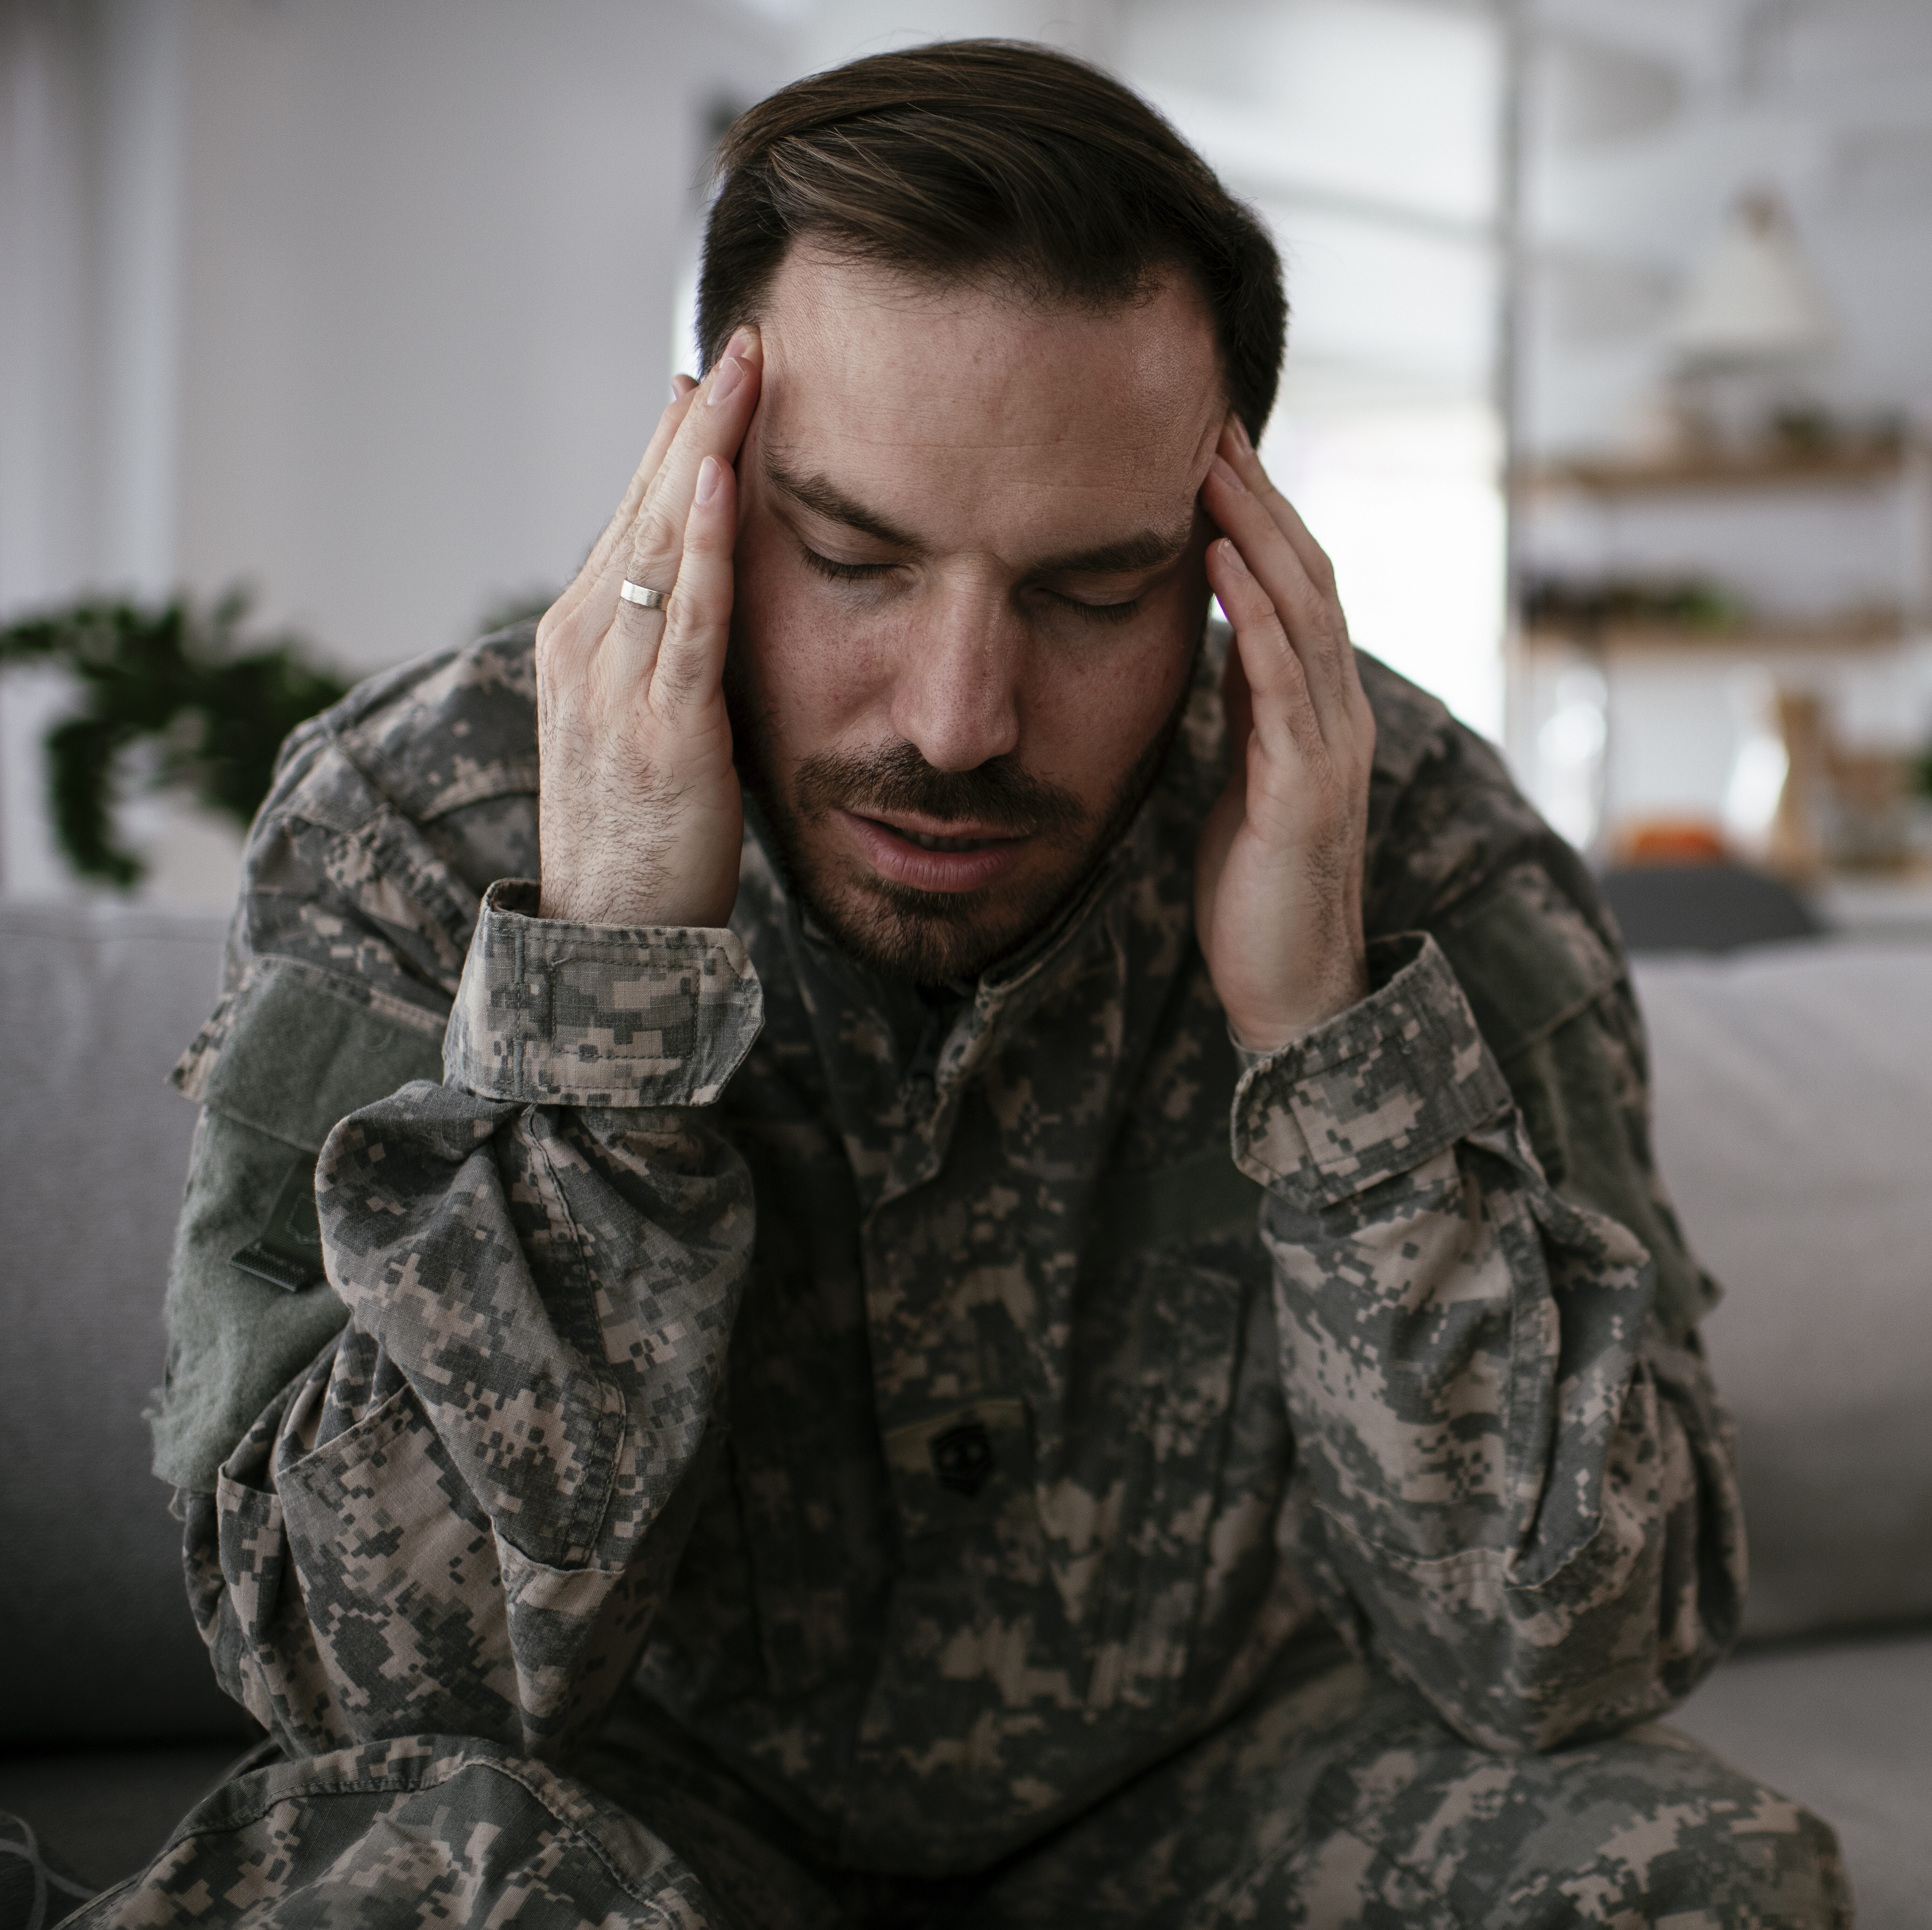 How Veterans Can Find the Support They Need for Headache and Migraine Diseases